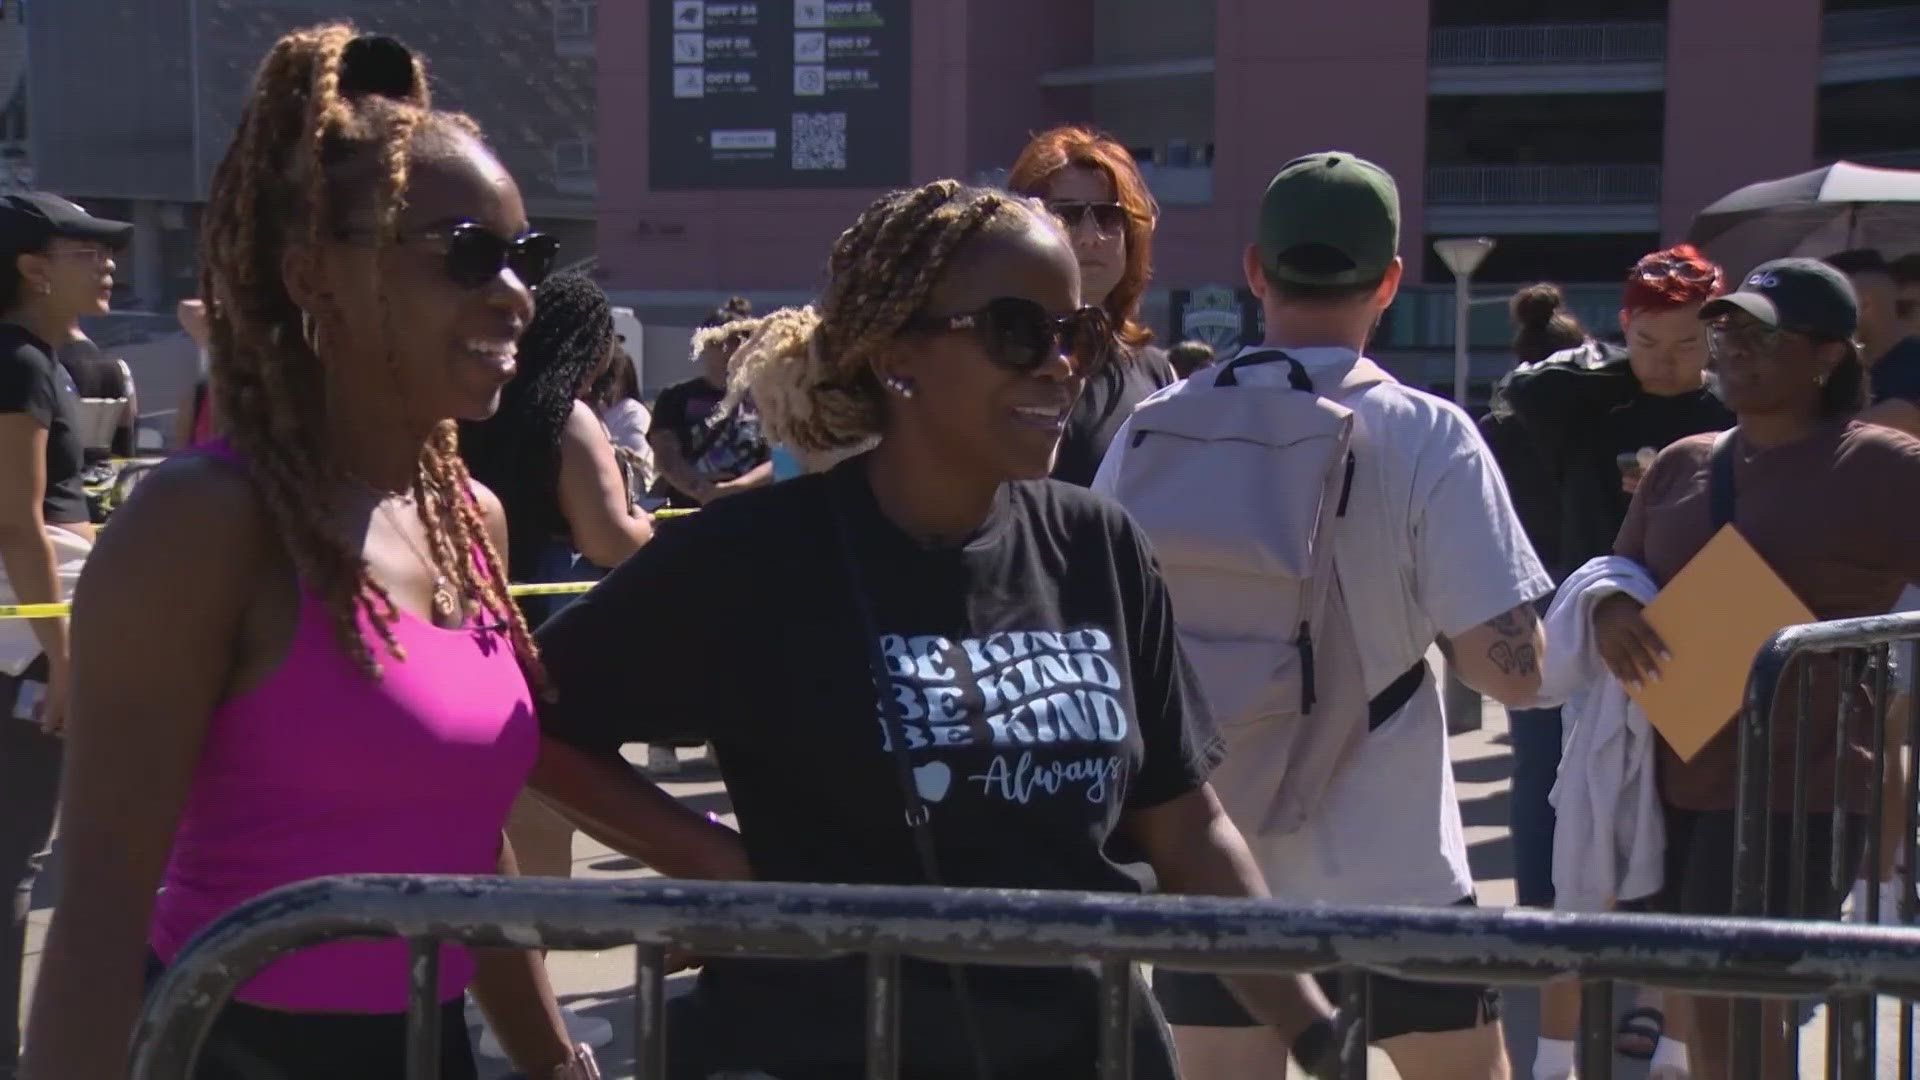 Fans have traveled from near and far to see Beyoncé perform at Lumen Field on Sept. 14.